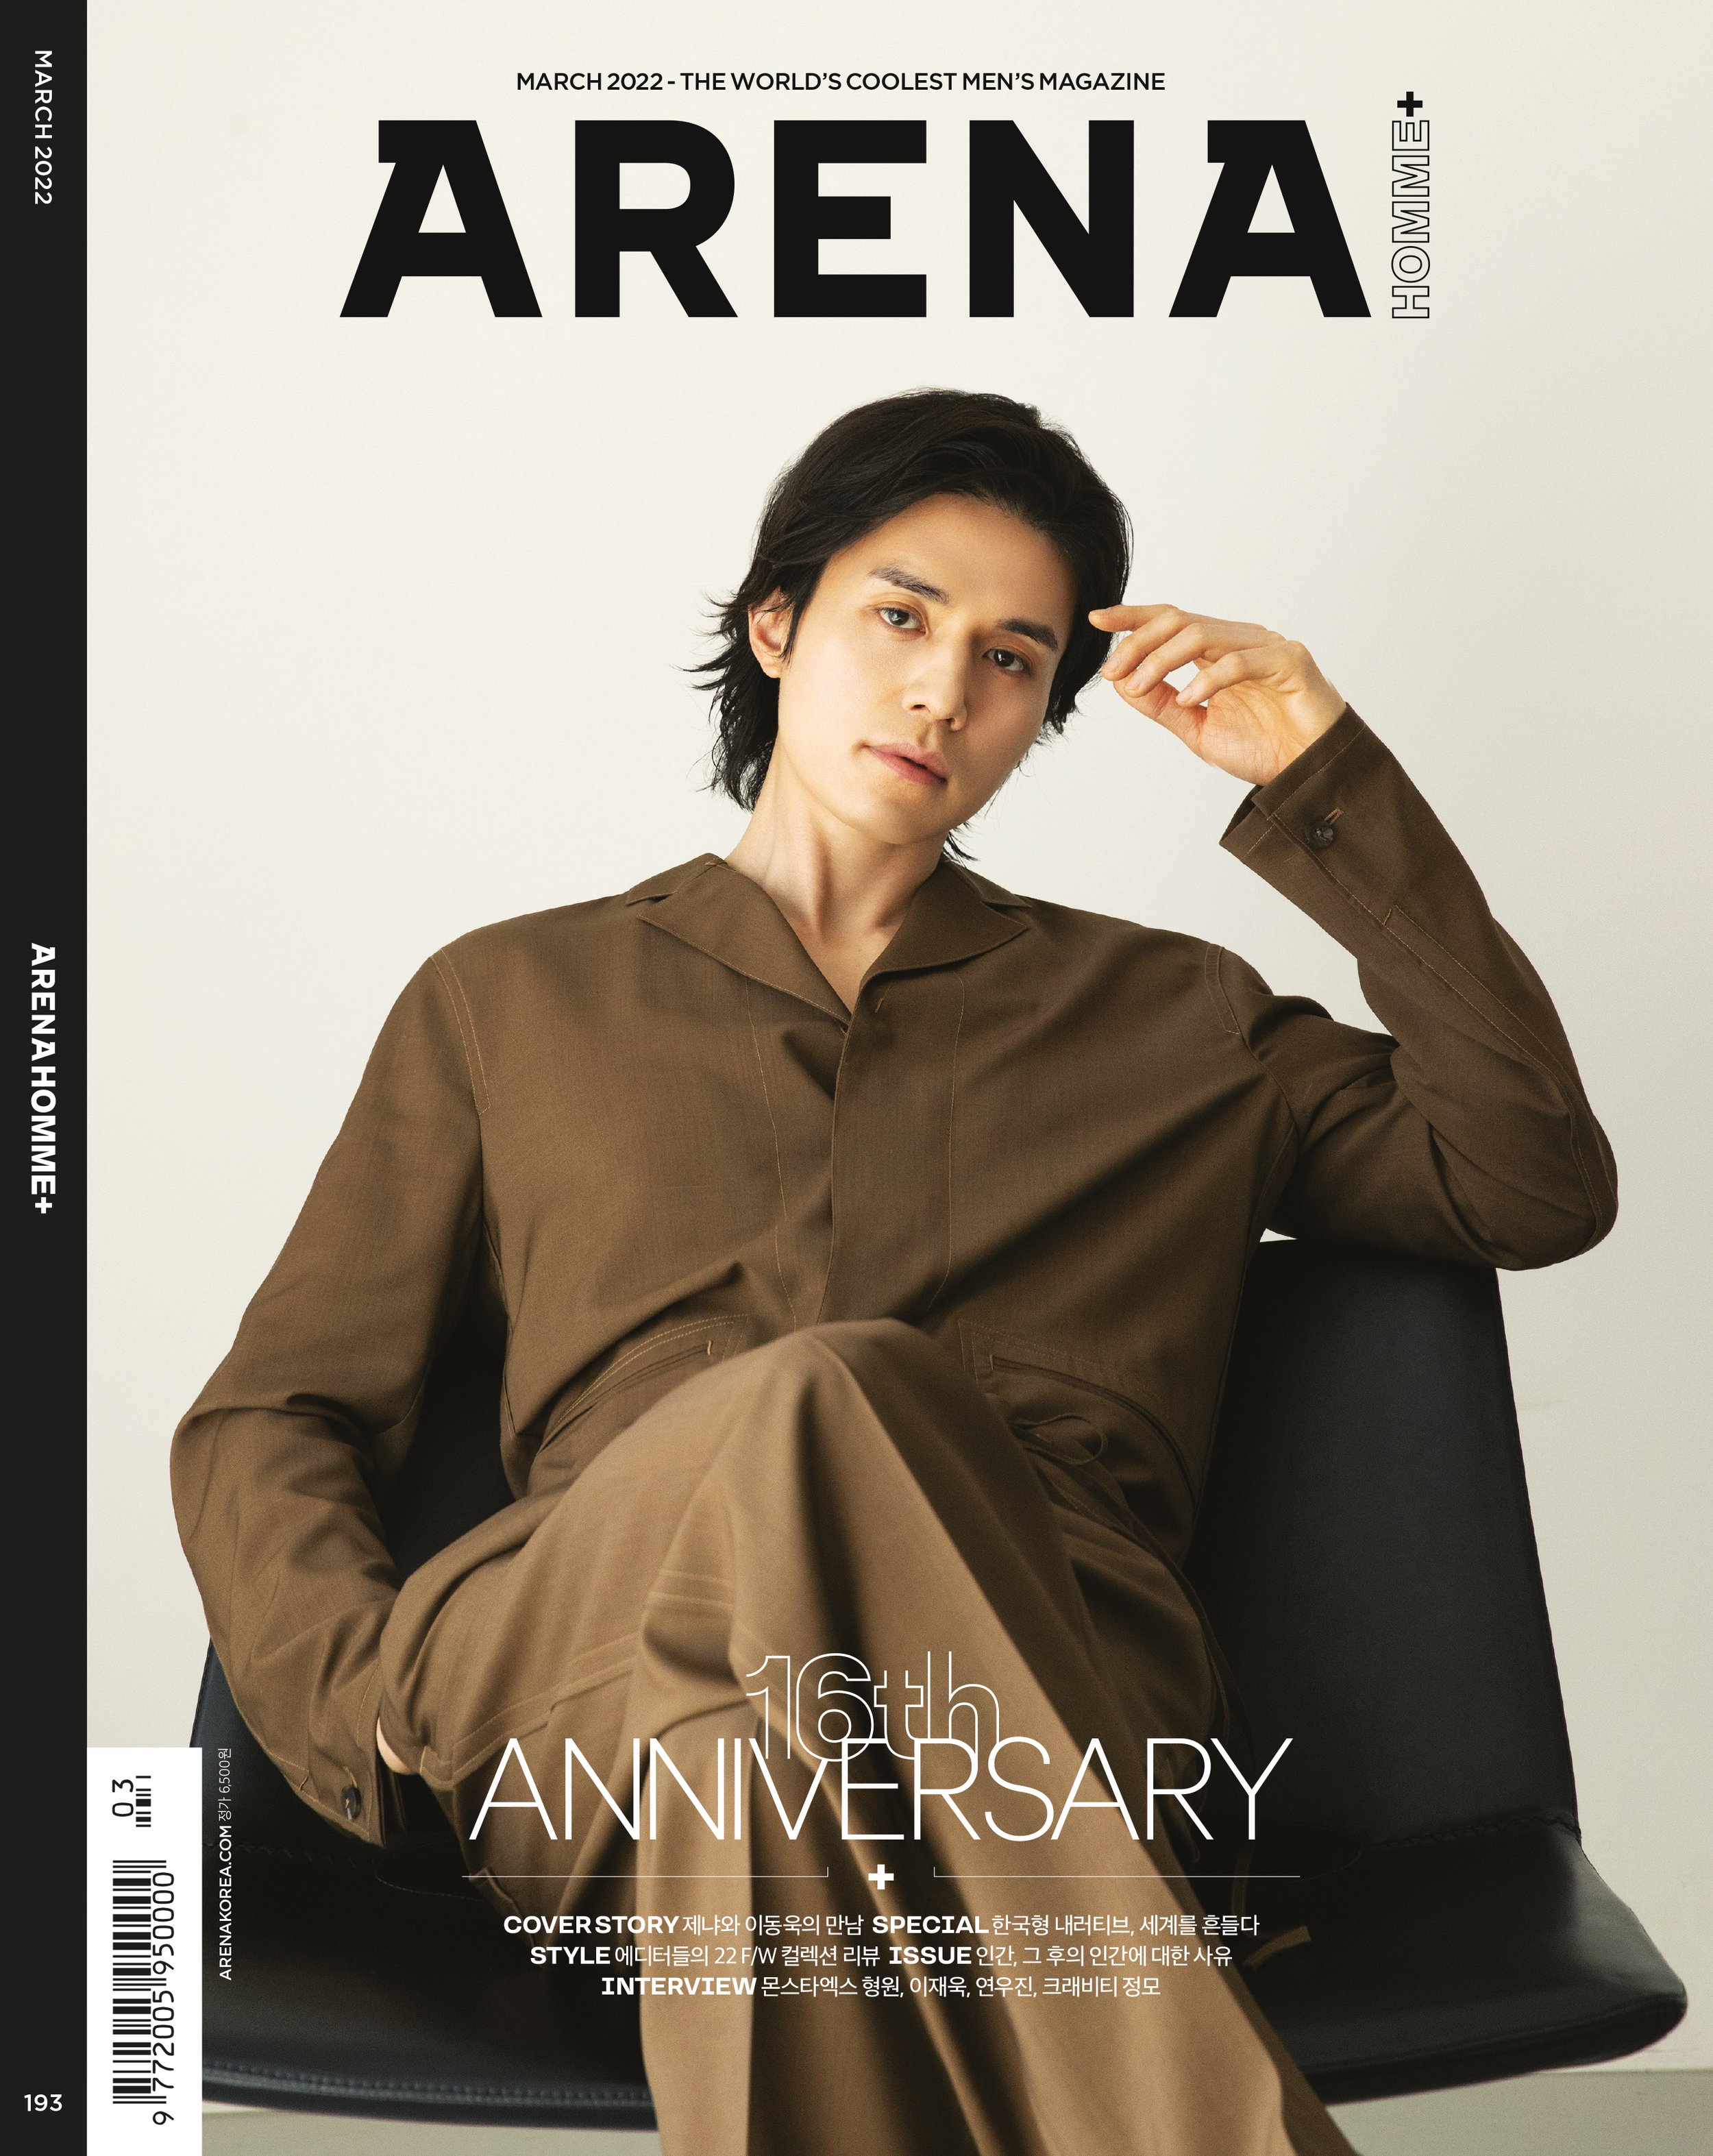 ARENA HOMME-2022-03-COCO-00.jpg